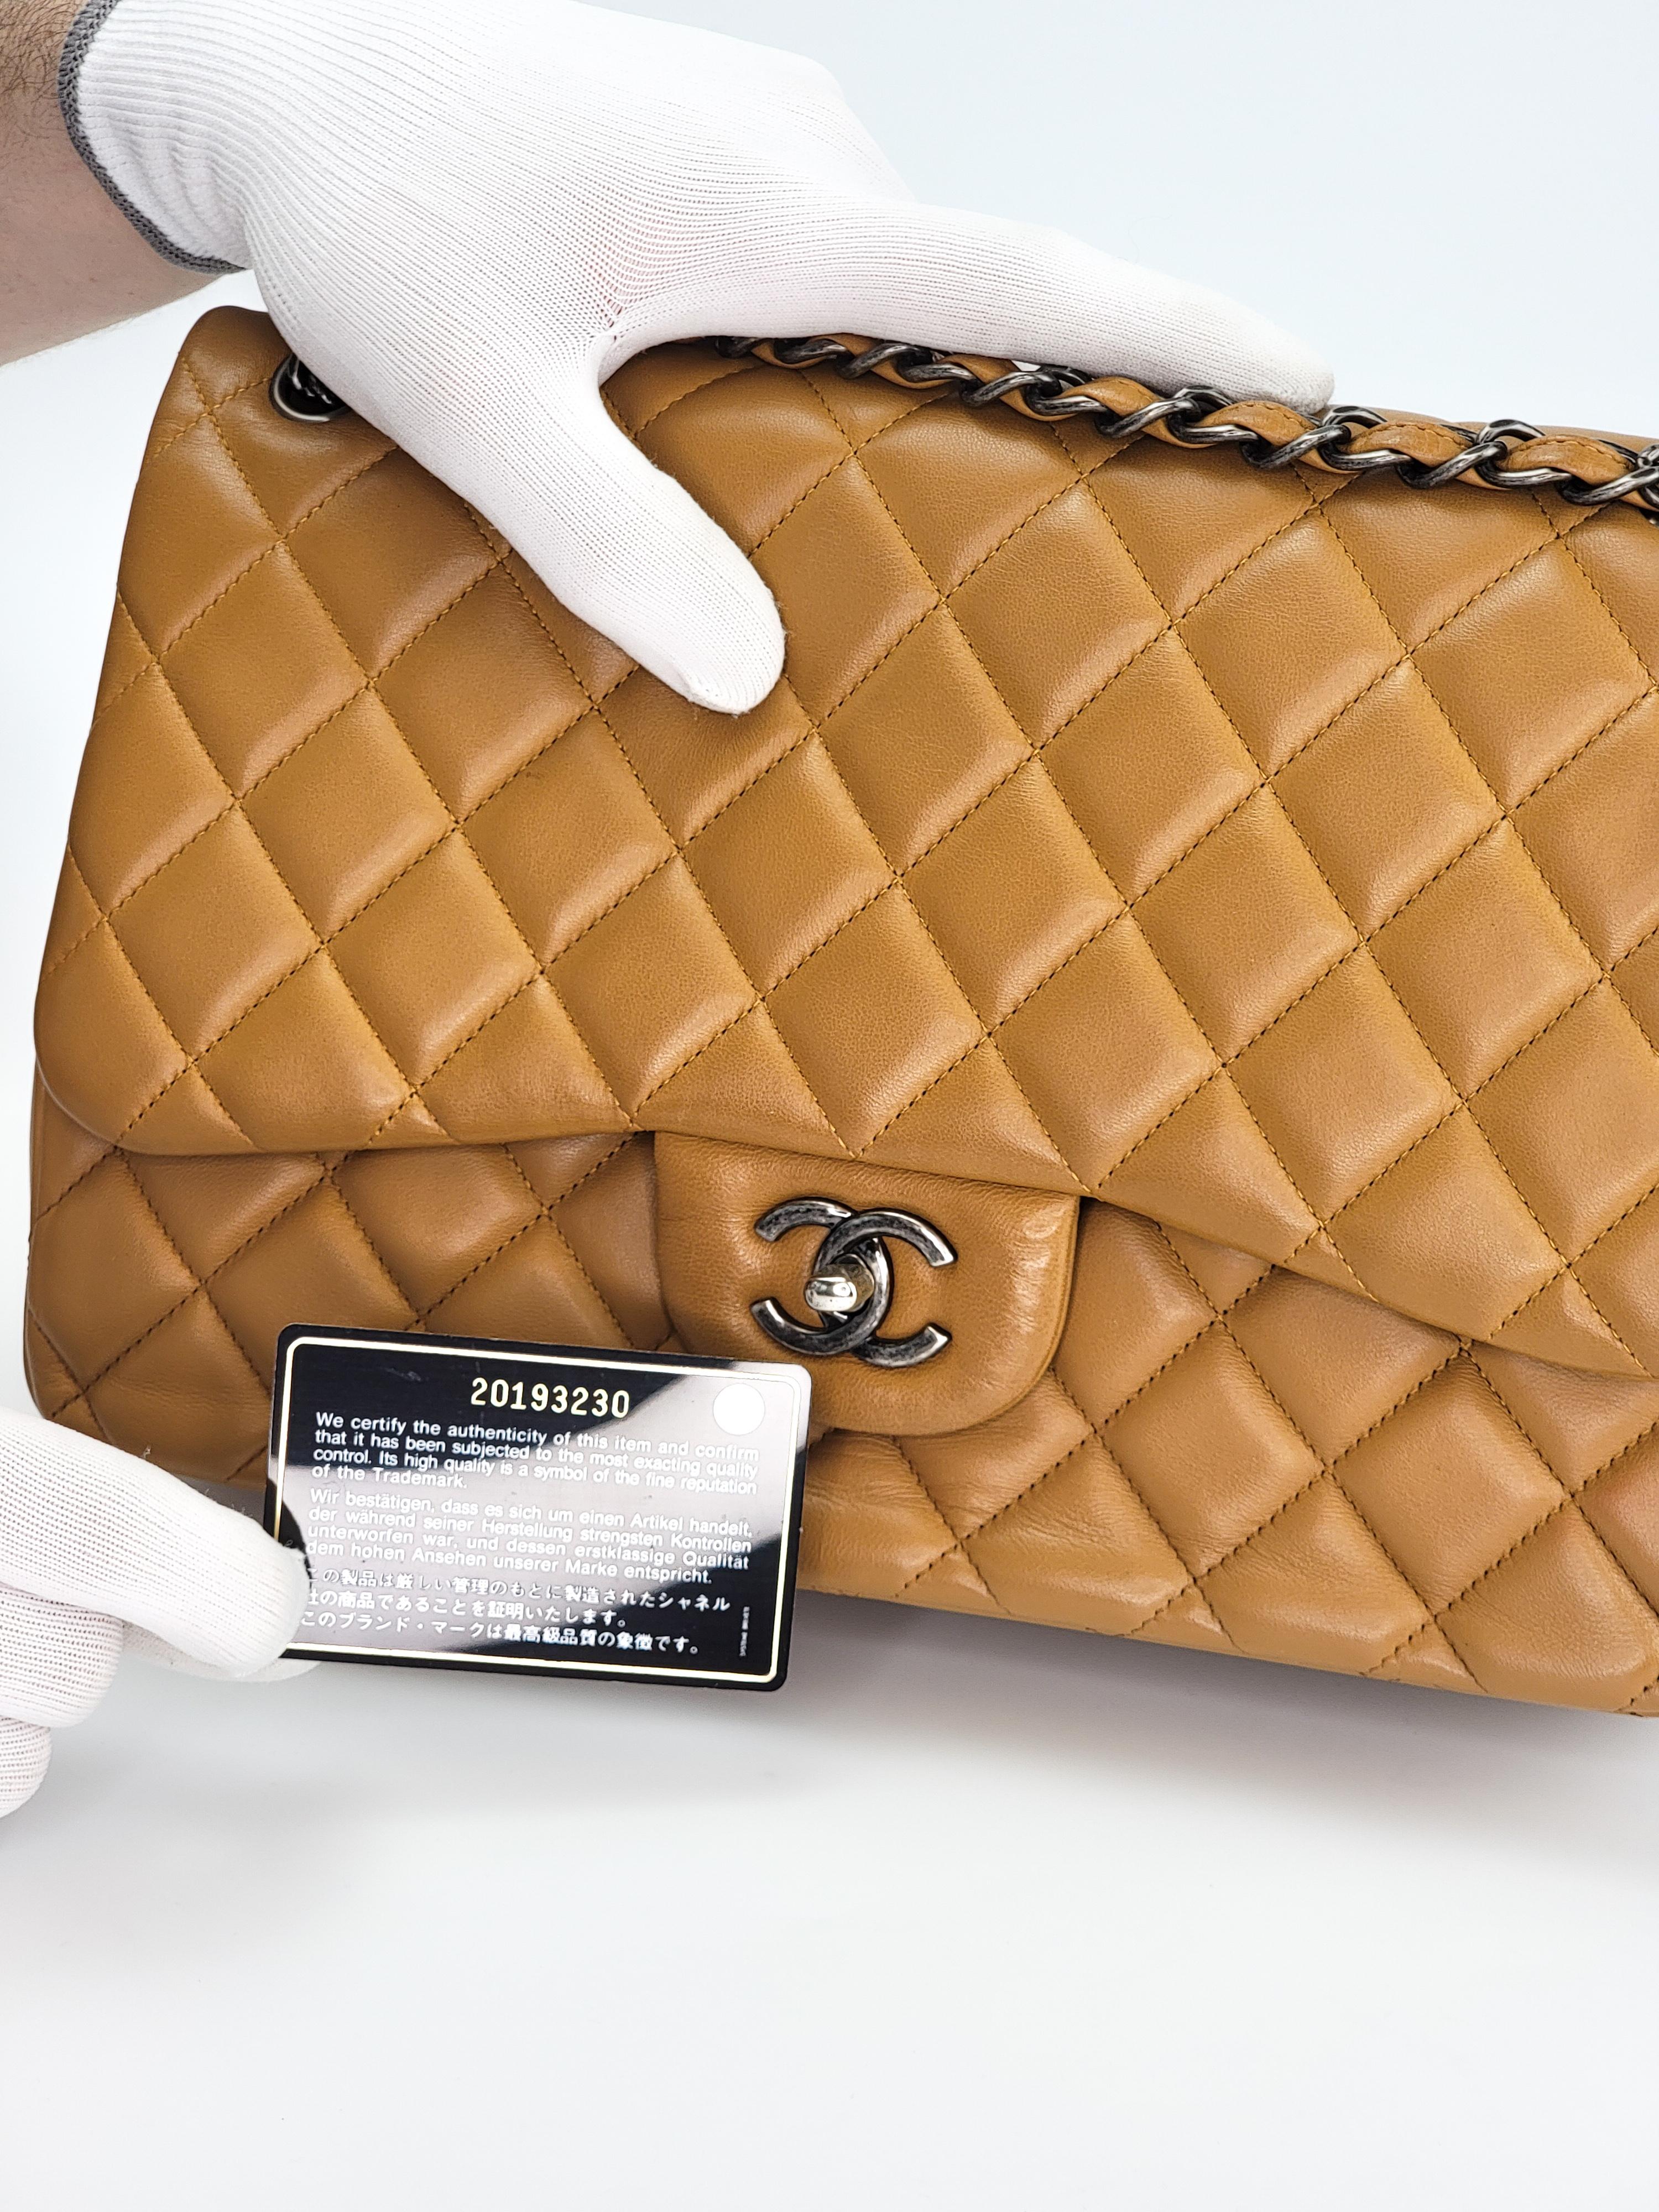 Chanel Quilted Caramel Lambskin Classic Jumbo Double Flap Bag In Excellent Condition For Sale In Montreal, Quebec